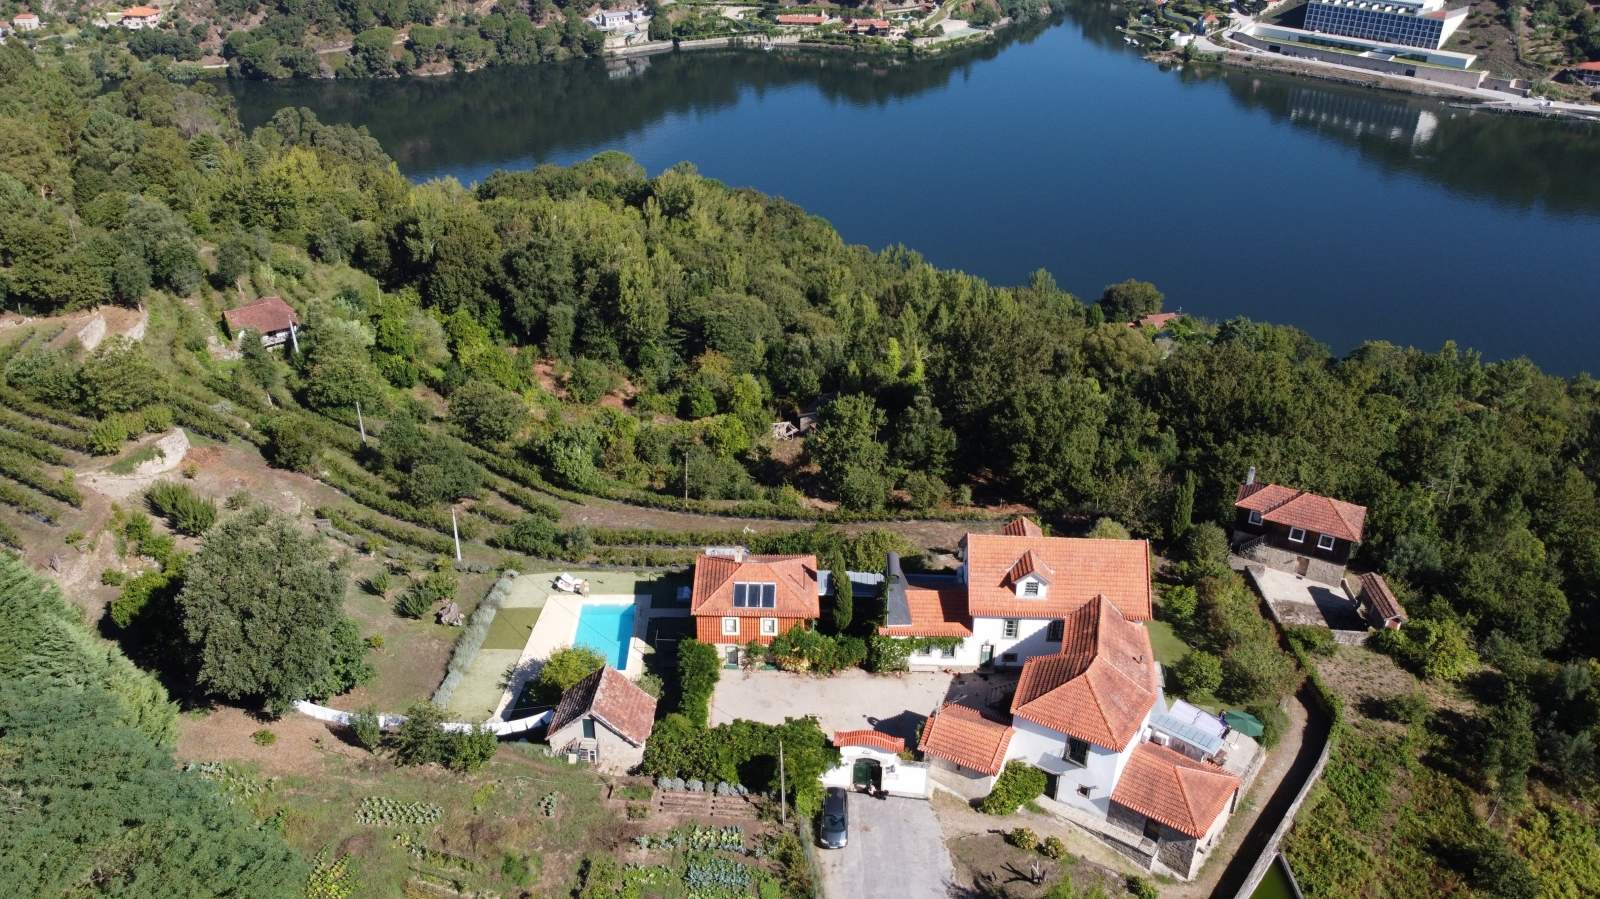 Selling: Property with pool and gardens, in the Douro Region, Cinfães, North Portugal_192367